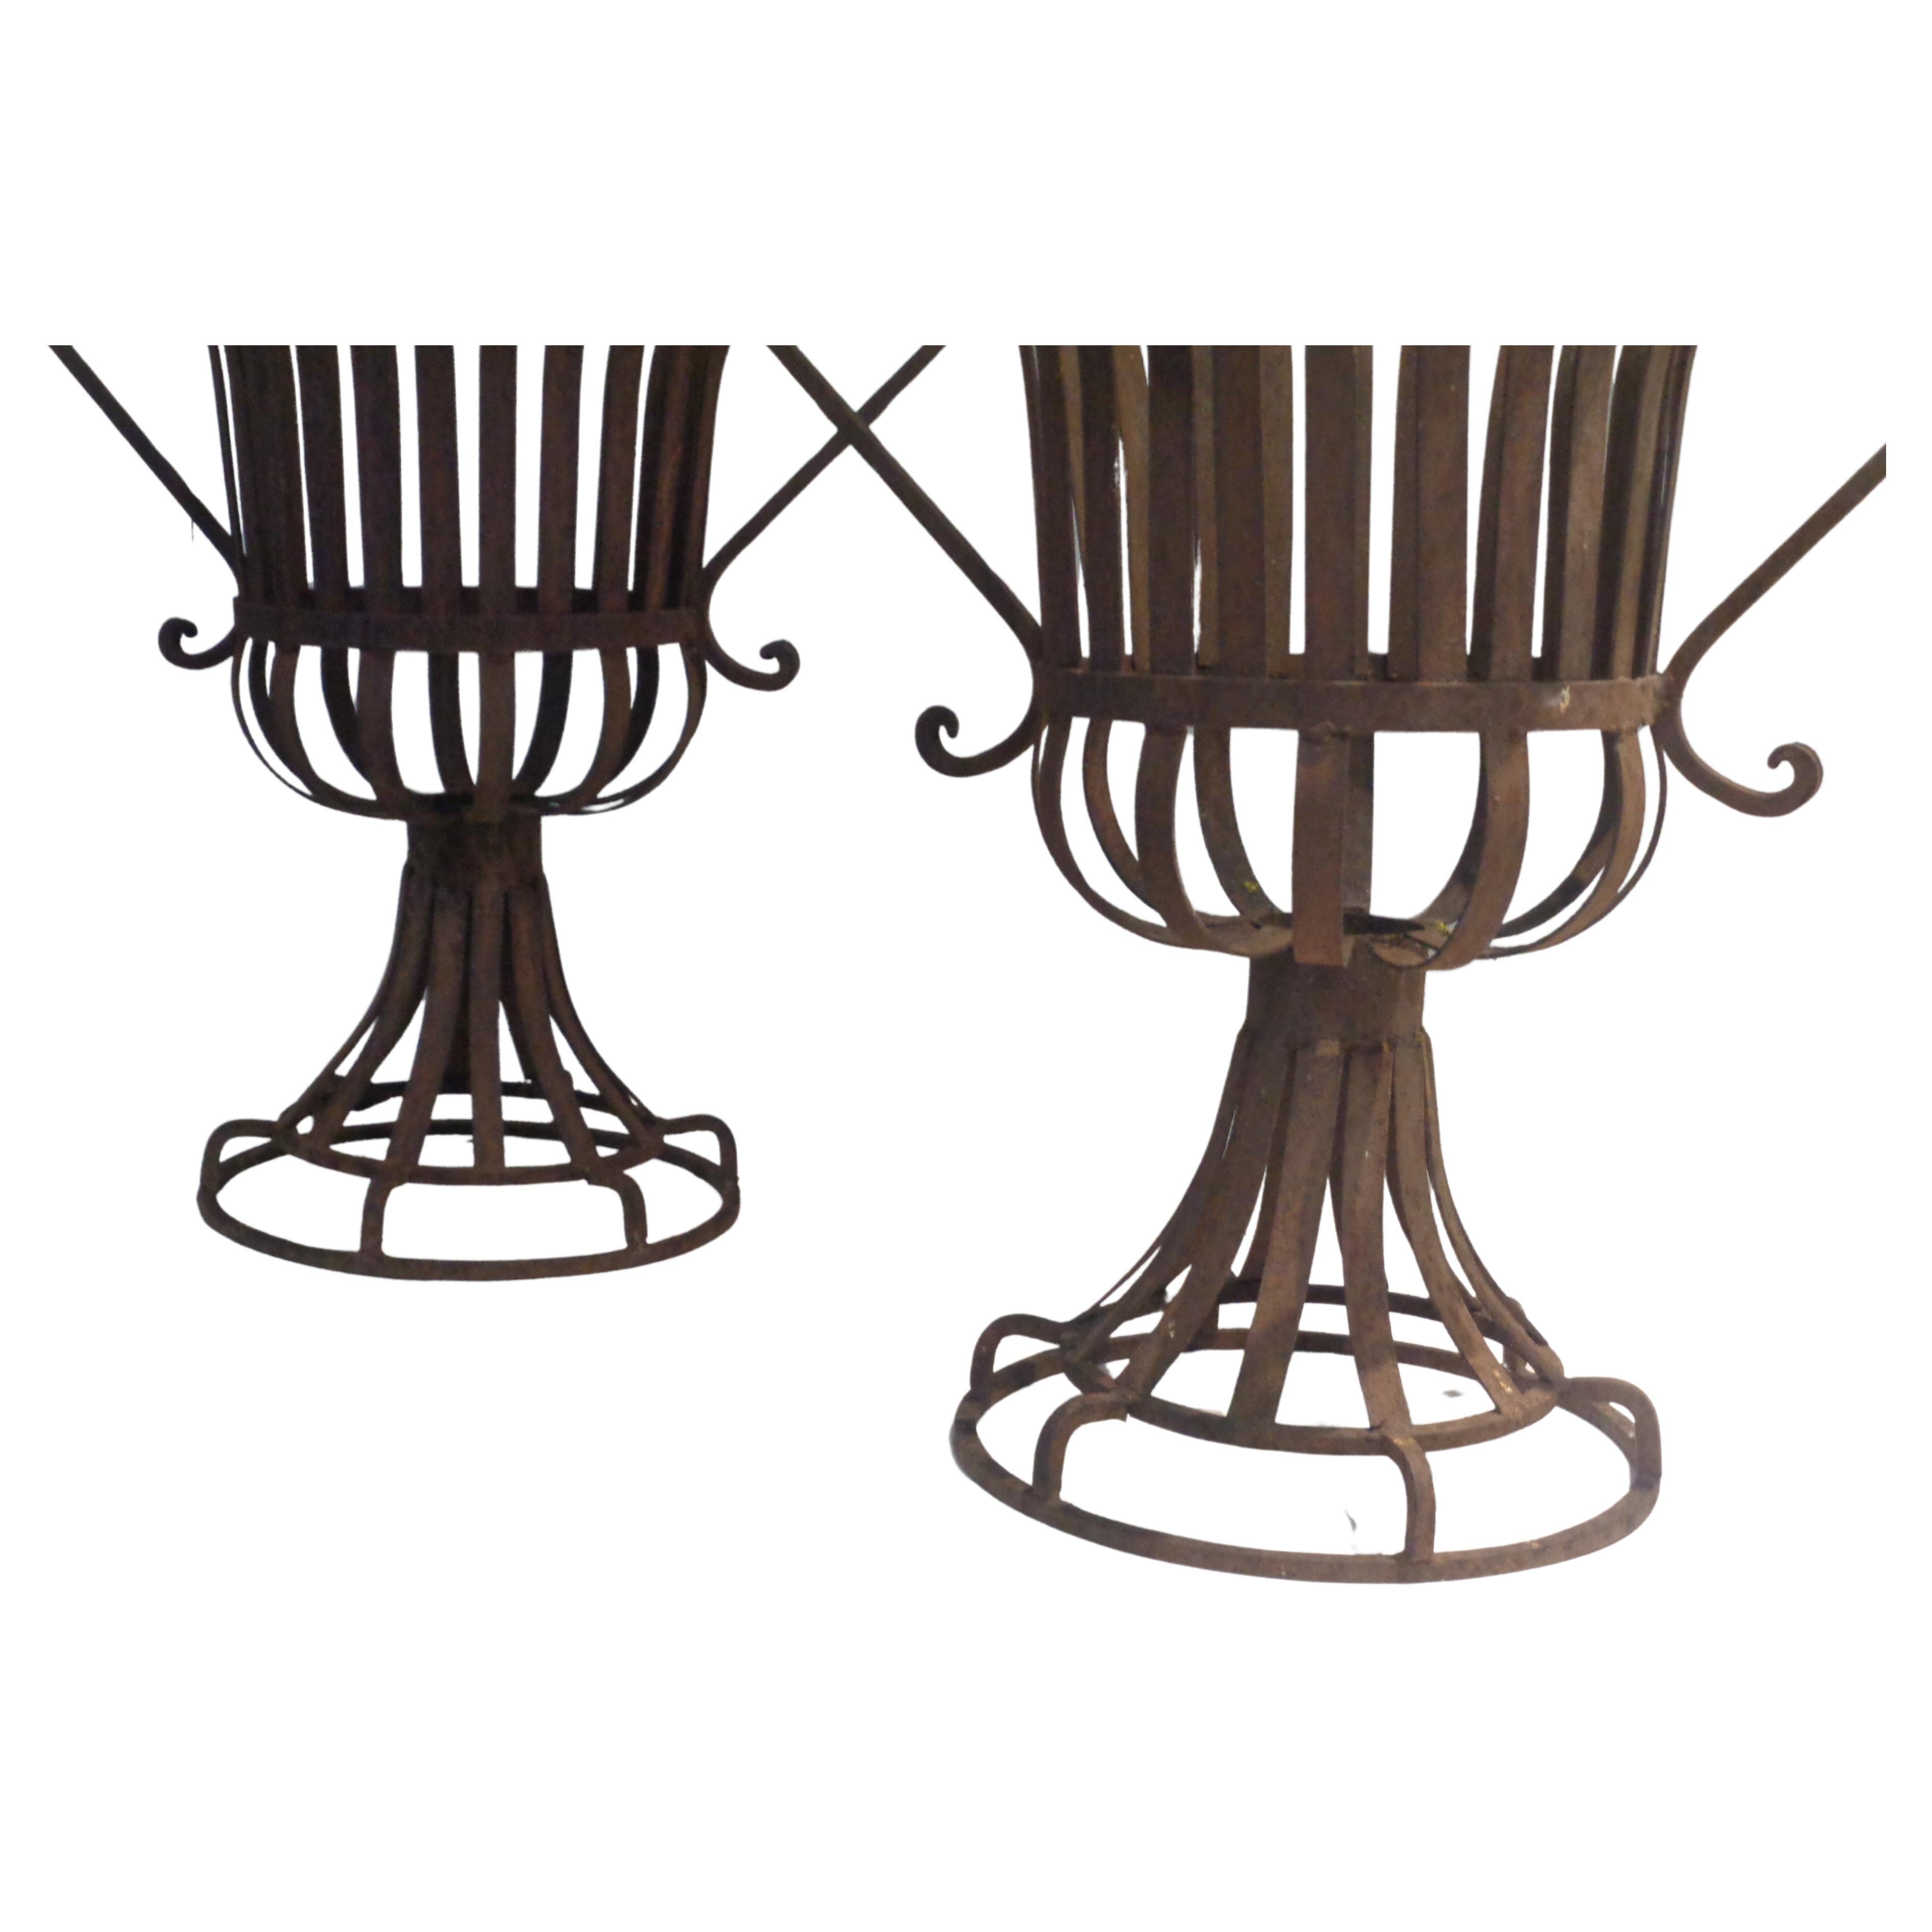 Pair Neoclassical Style Strap Iron Garden Urns, Circa 1970-1980 For Sale 6